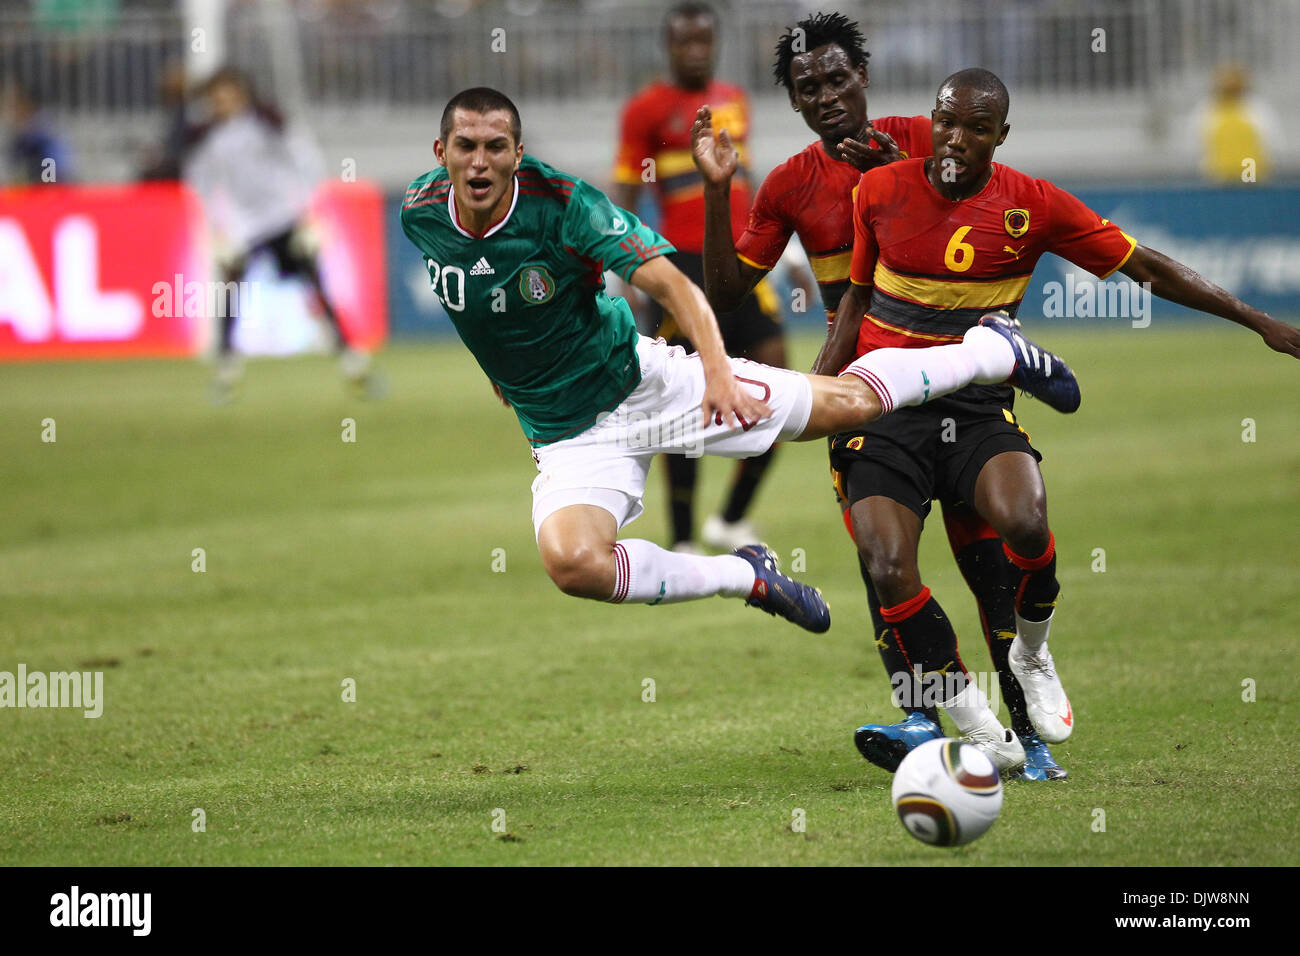 Jorge Torres Nilo (#20) Defender for Mexico gains air after being tackled from behind by Pataca (#6) Midfielder for Angola.  Mexico defeated Angola 1-0 at Reliant Stadium in Houston, TX. (Credit Image: © Anthony Vasser/Southcreek Global/ZUMApress.com) Stock Photo